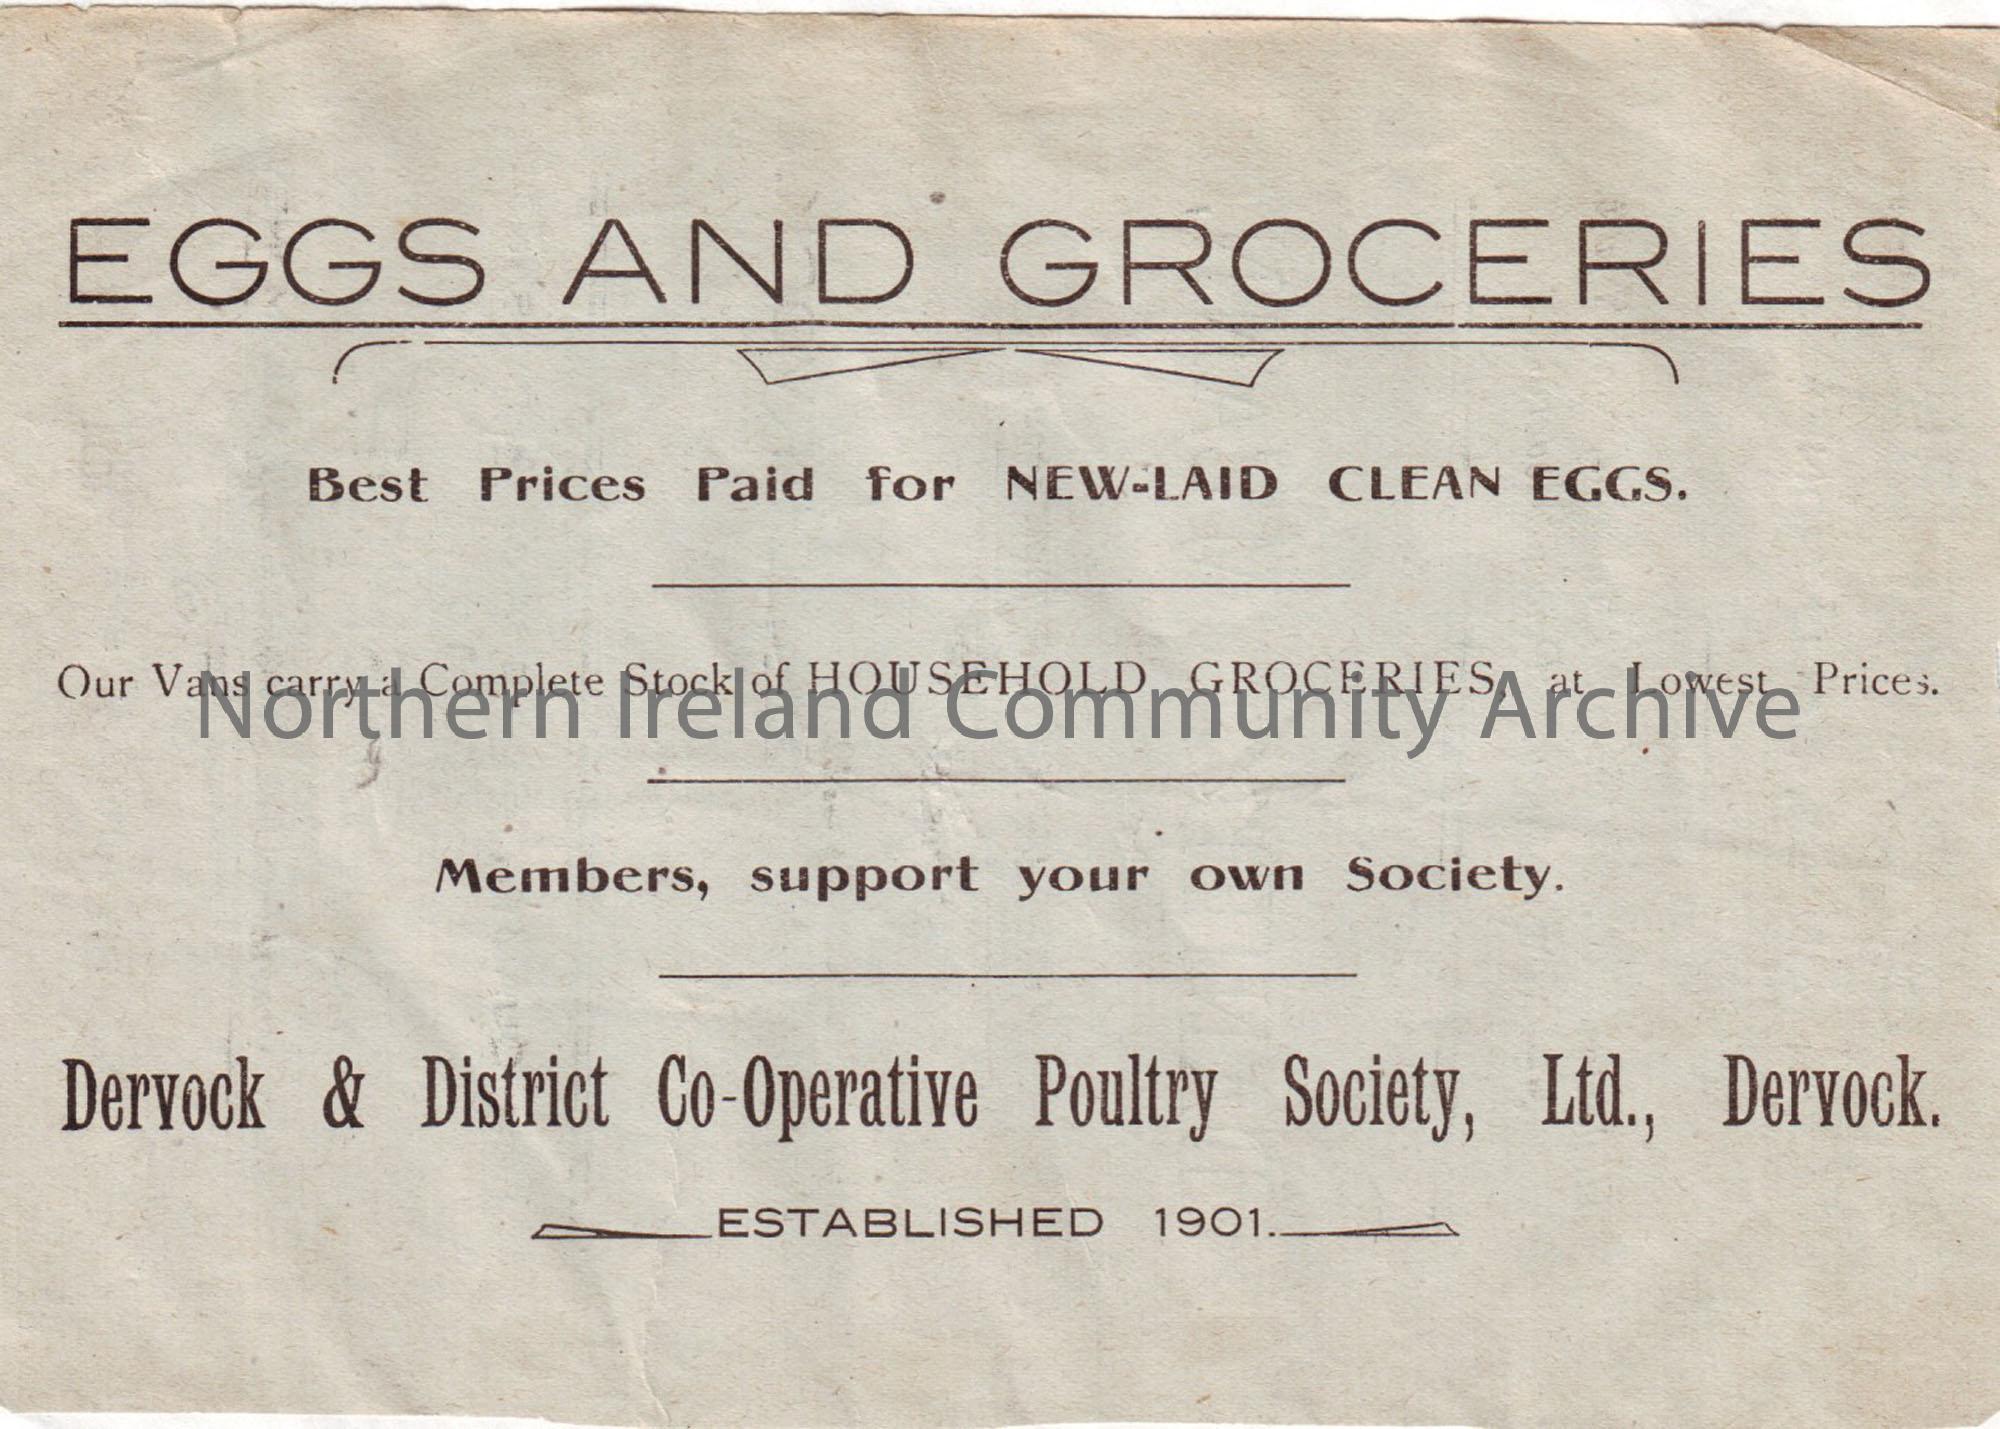 Advert for Dervock and District Co-Operative Poultry Society.